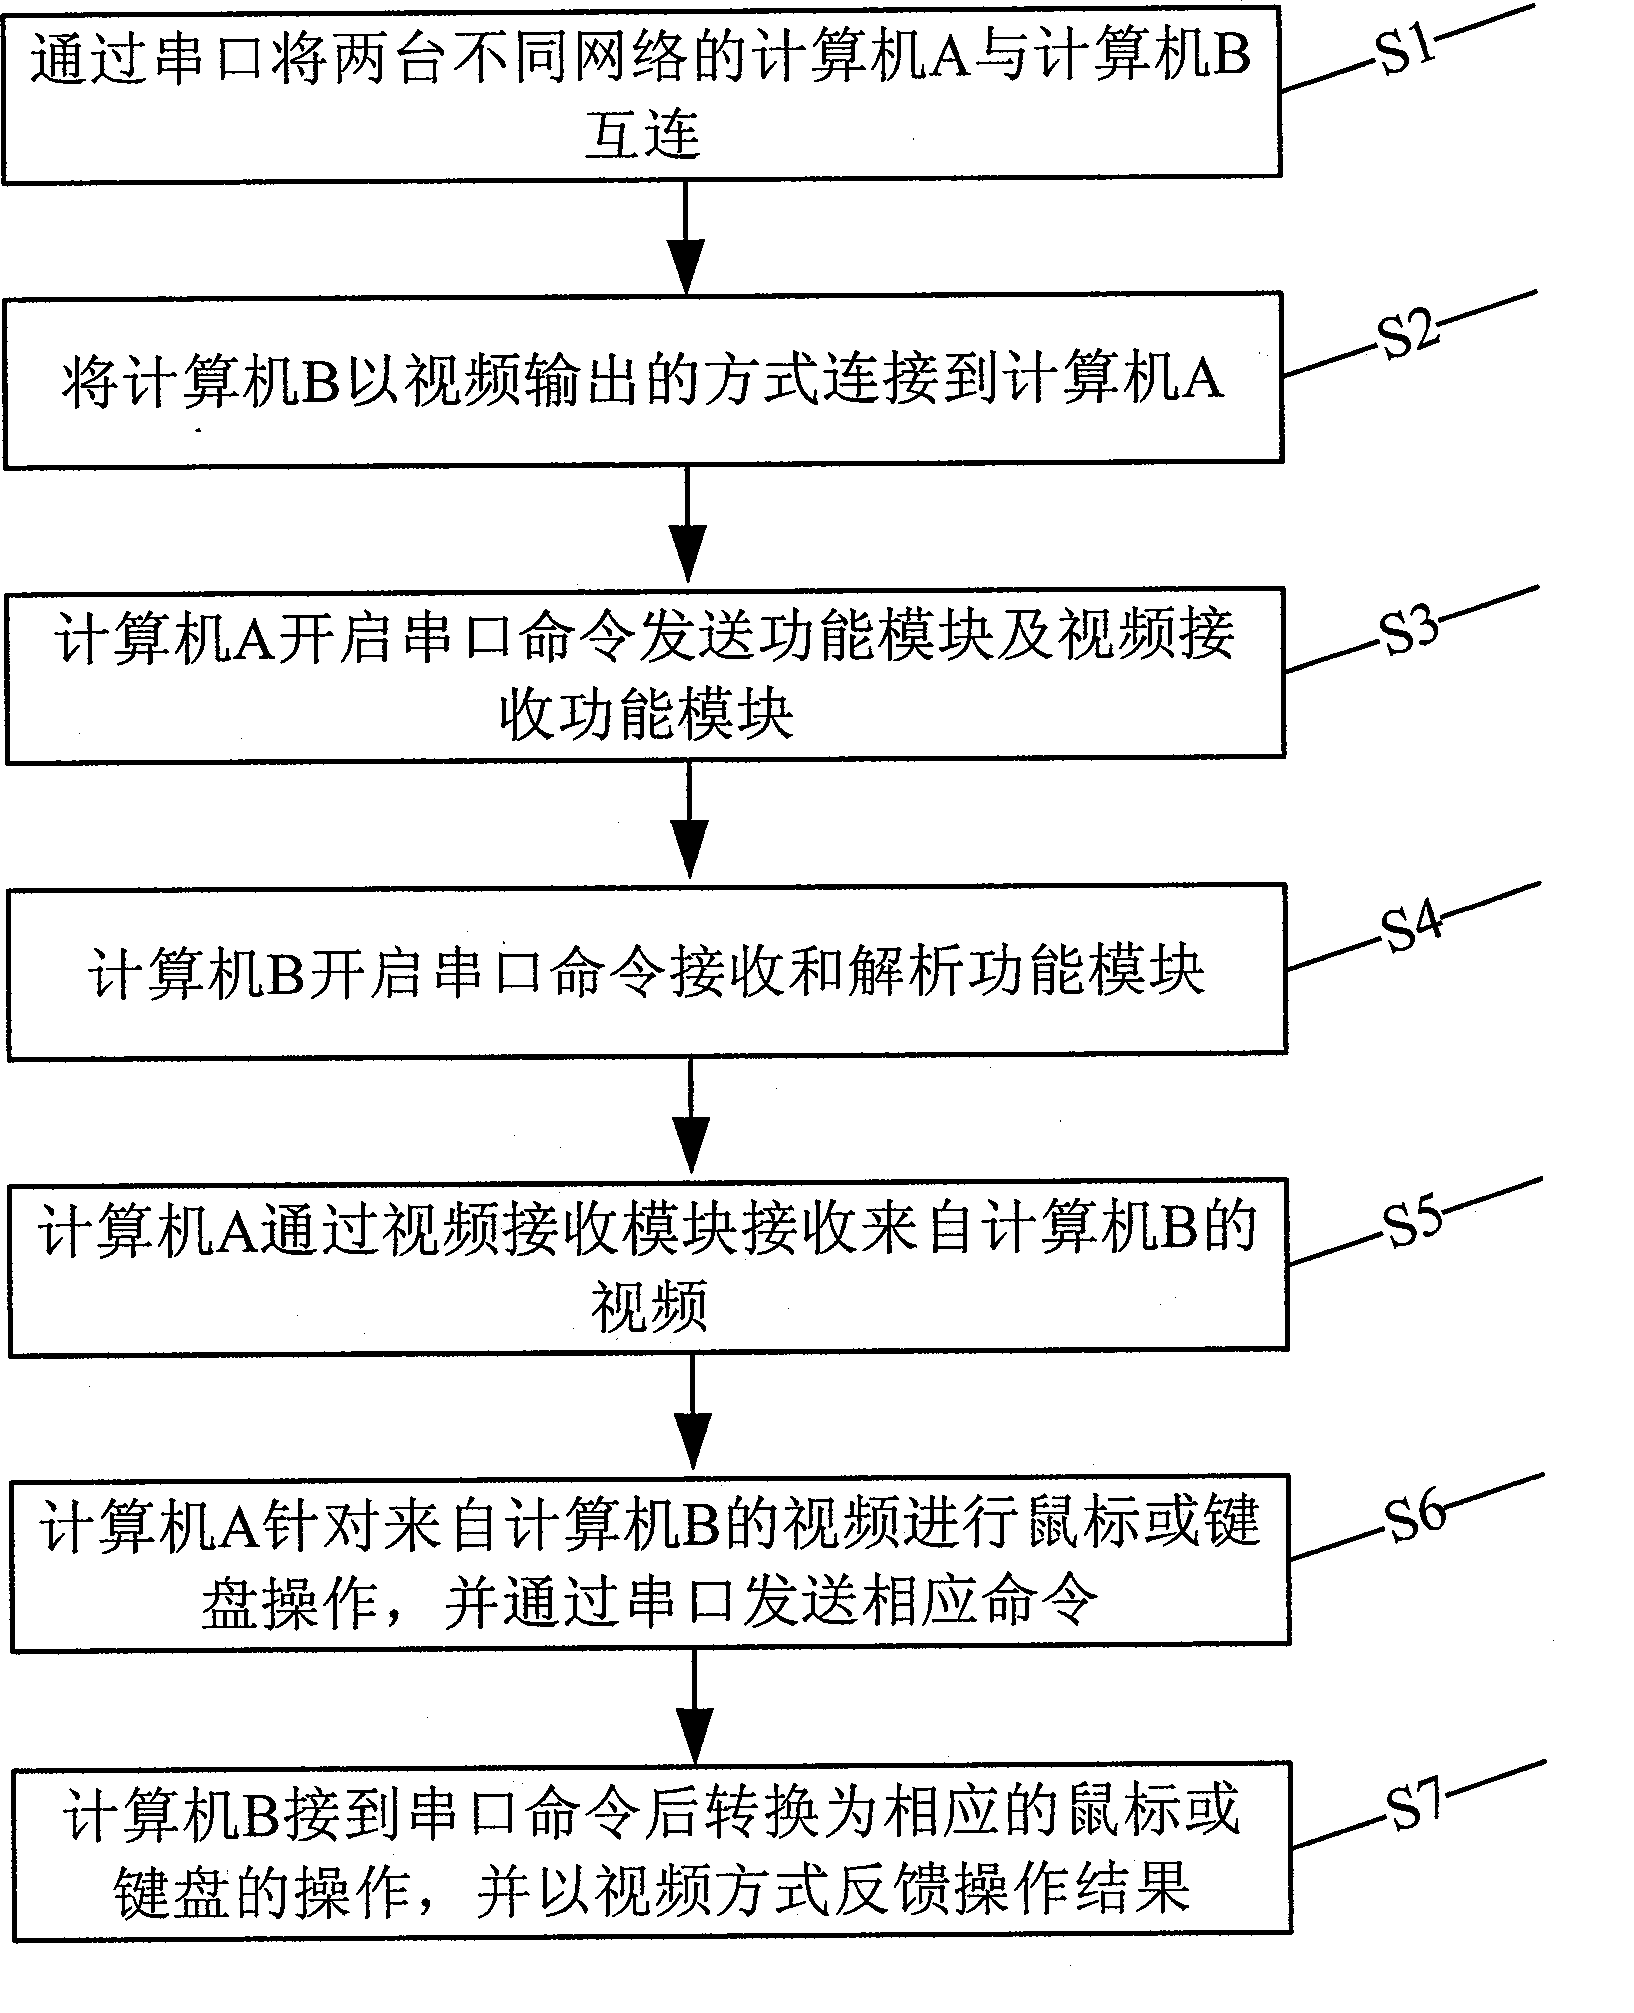 Resource sharing method for internal and external network